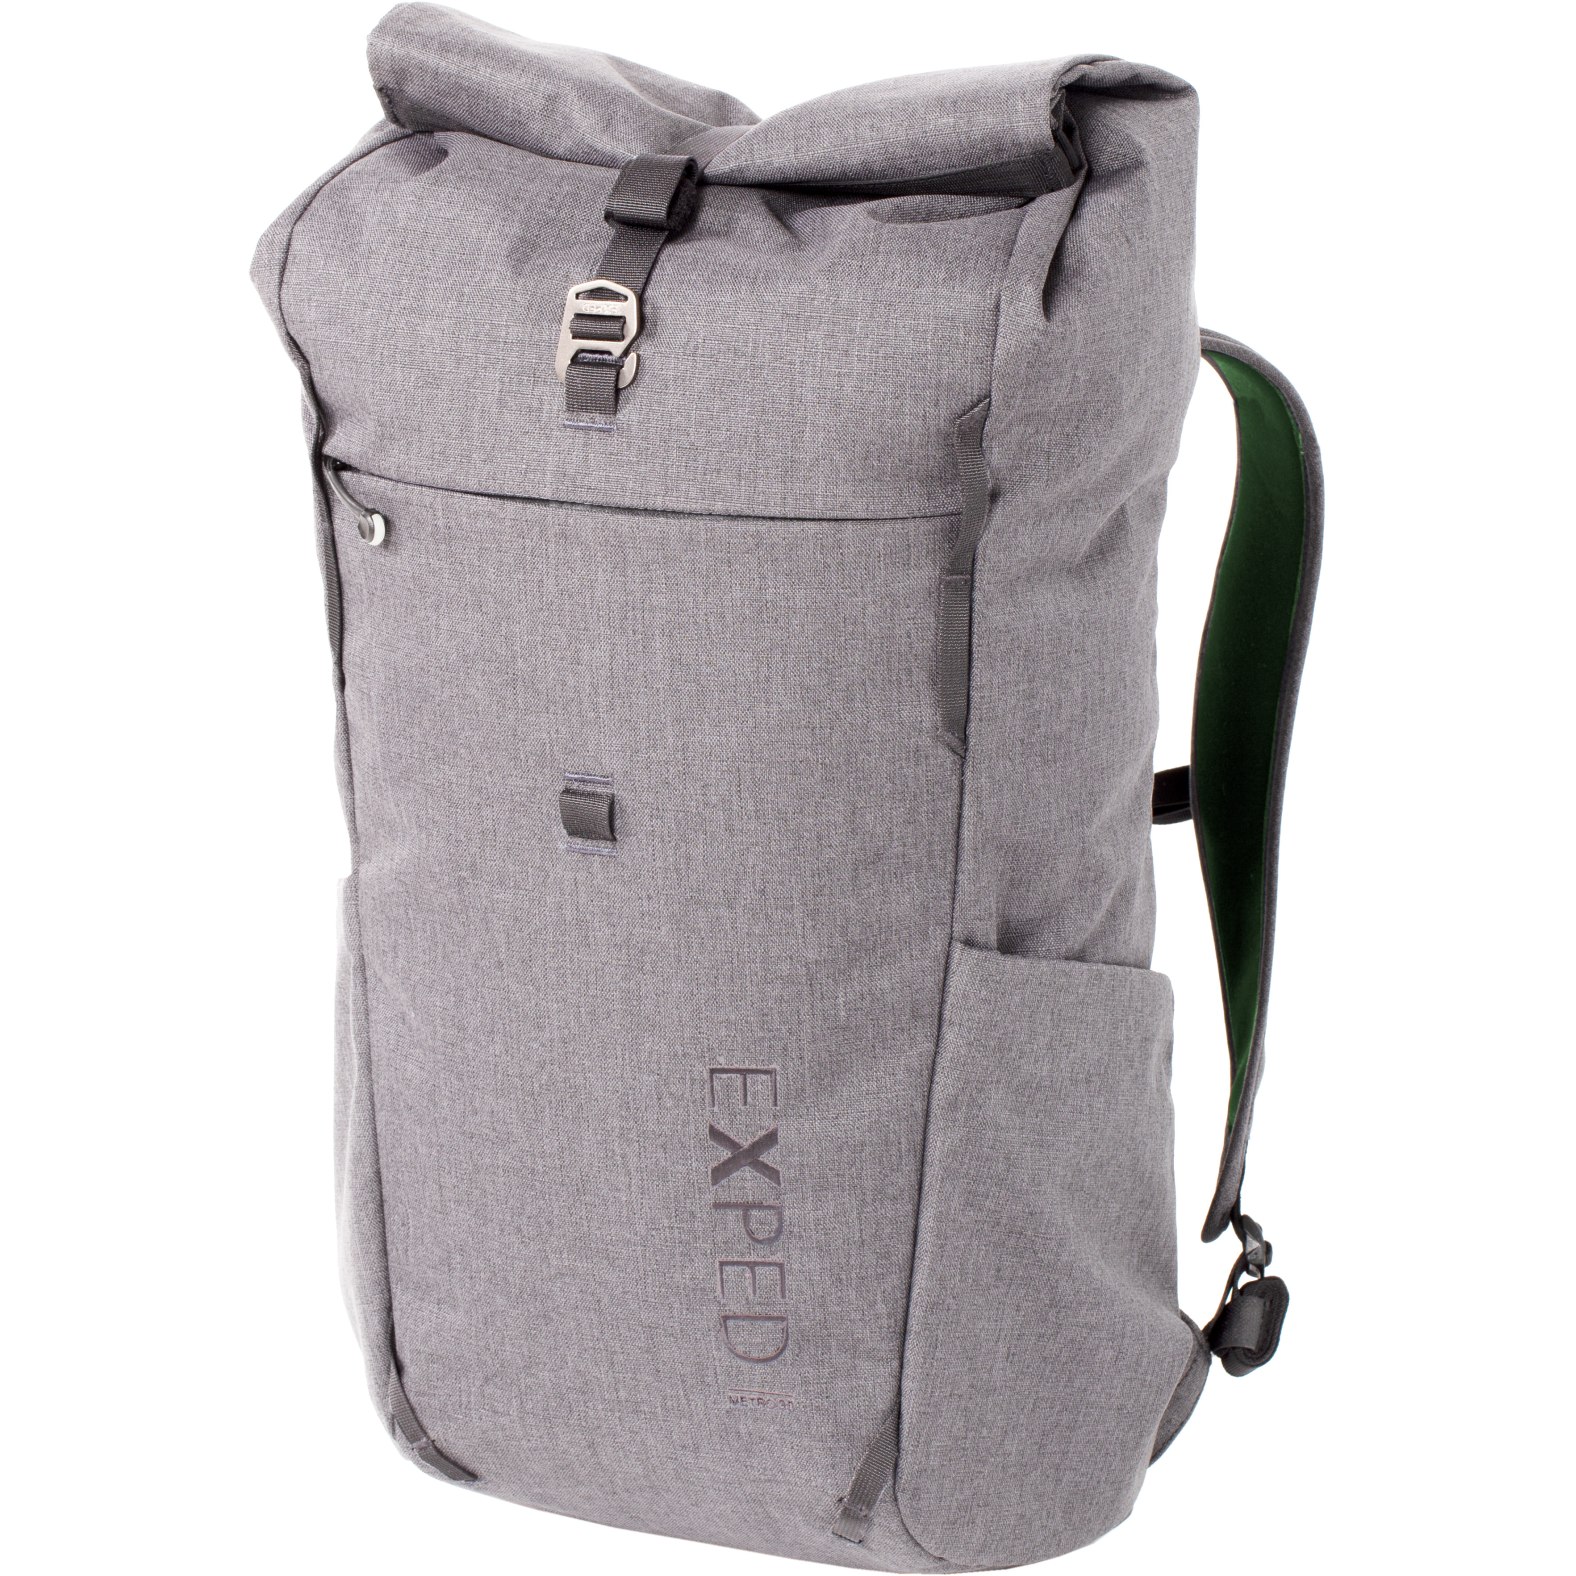 Picture of Exped Metro 30 Backpack - Grey